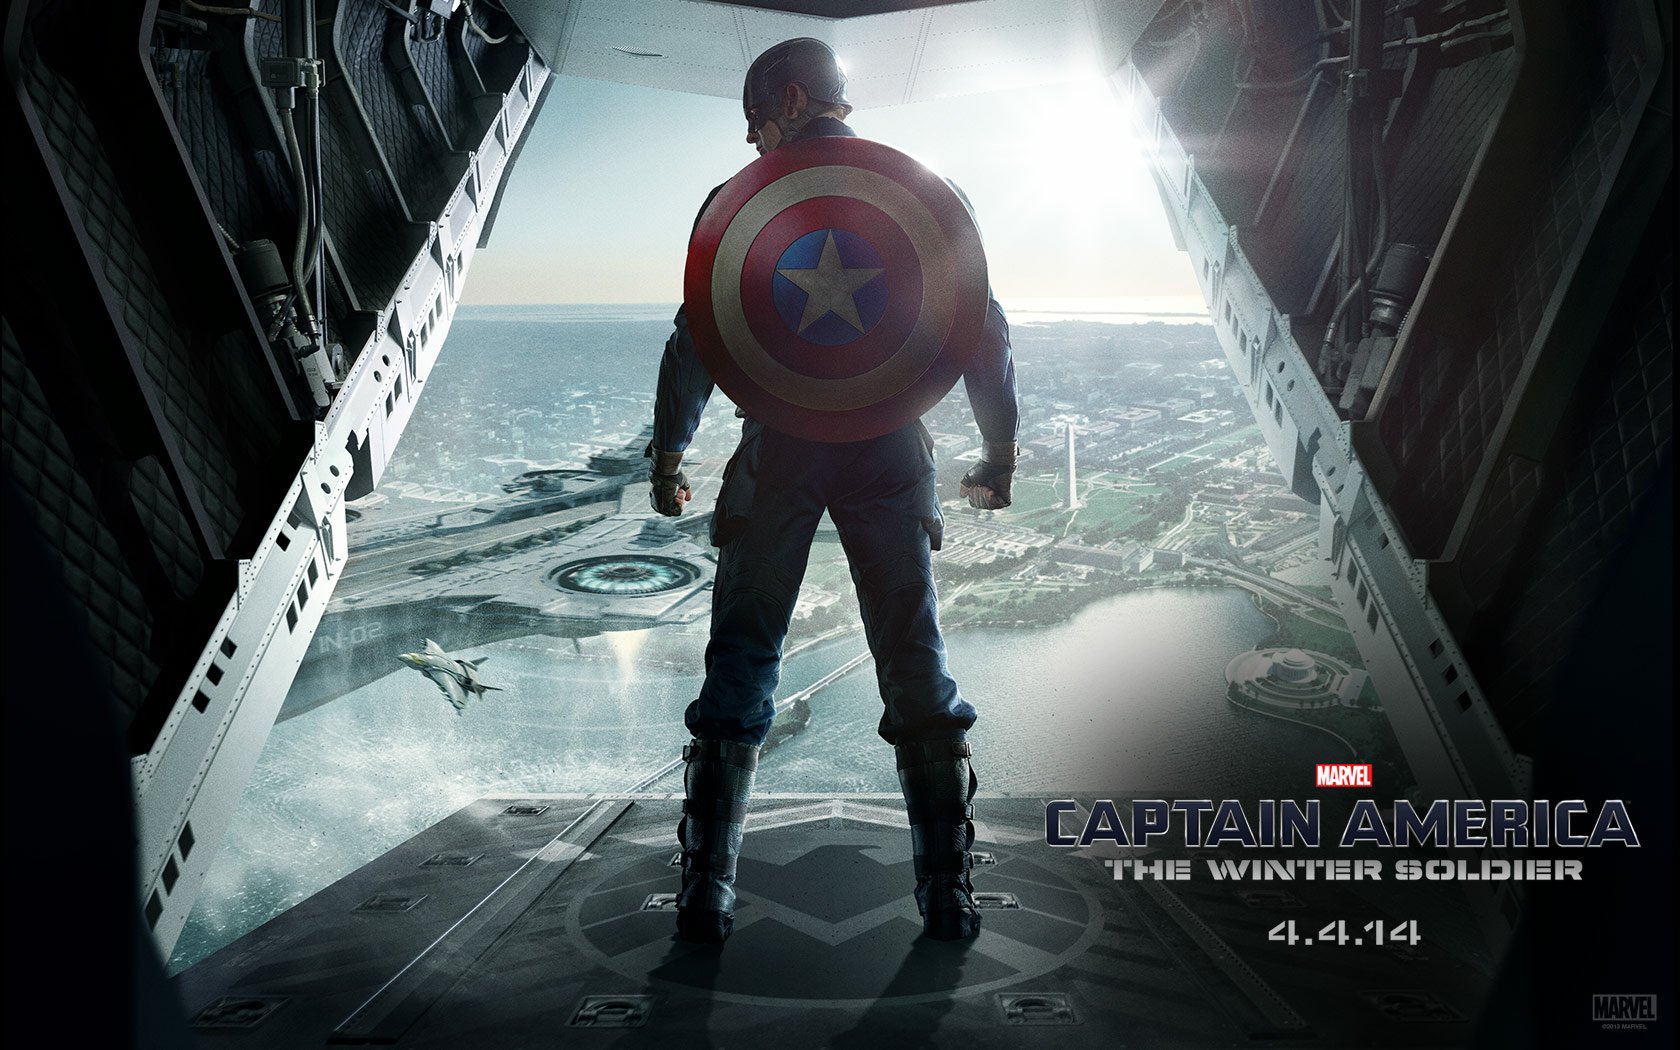 Captain America: The Winter Soldier Wallpaper and Background Image - 1680x1050 - ID:453112 - Wallpaper Abyss Captain America: The Winter Soldier Wallpaper and Background Image - 1680x1050 - ID:453112 - 웹